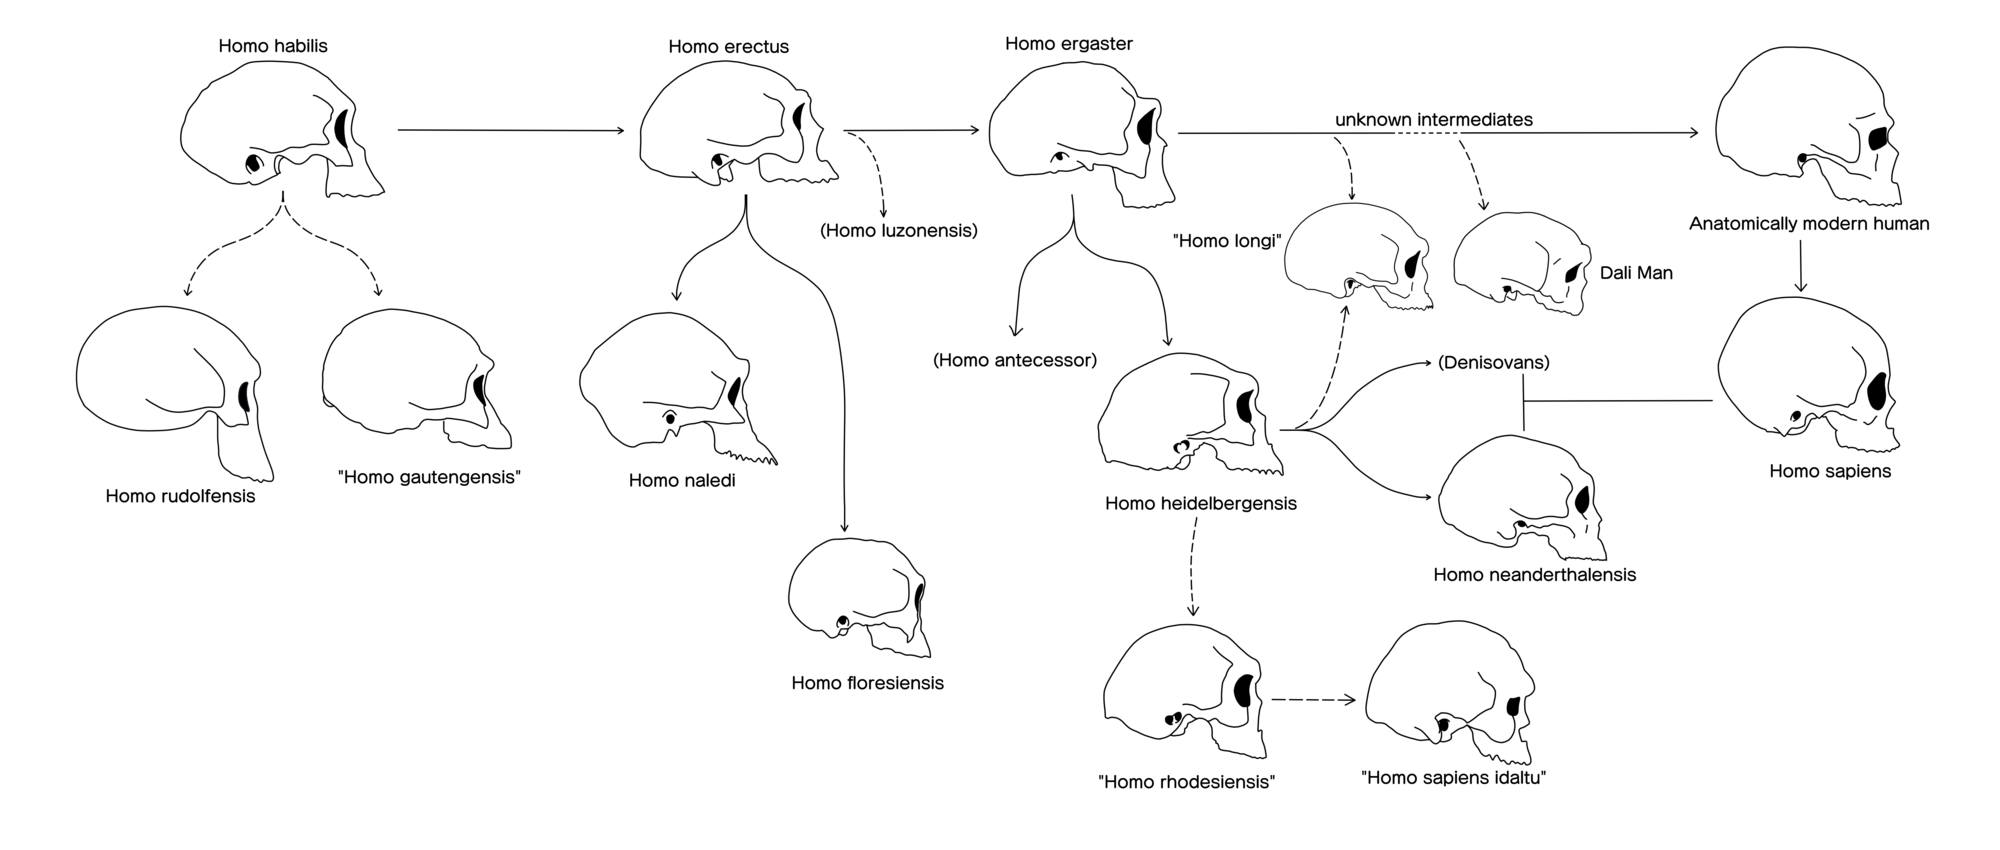 Evolution of the shape, size, and contours of the human (Homo) skull.[54][55][c][59][d][61][62][63][64][65][66][67][68]